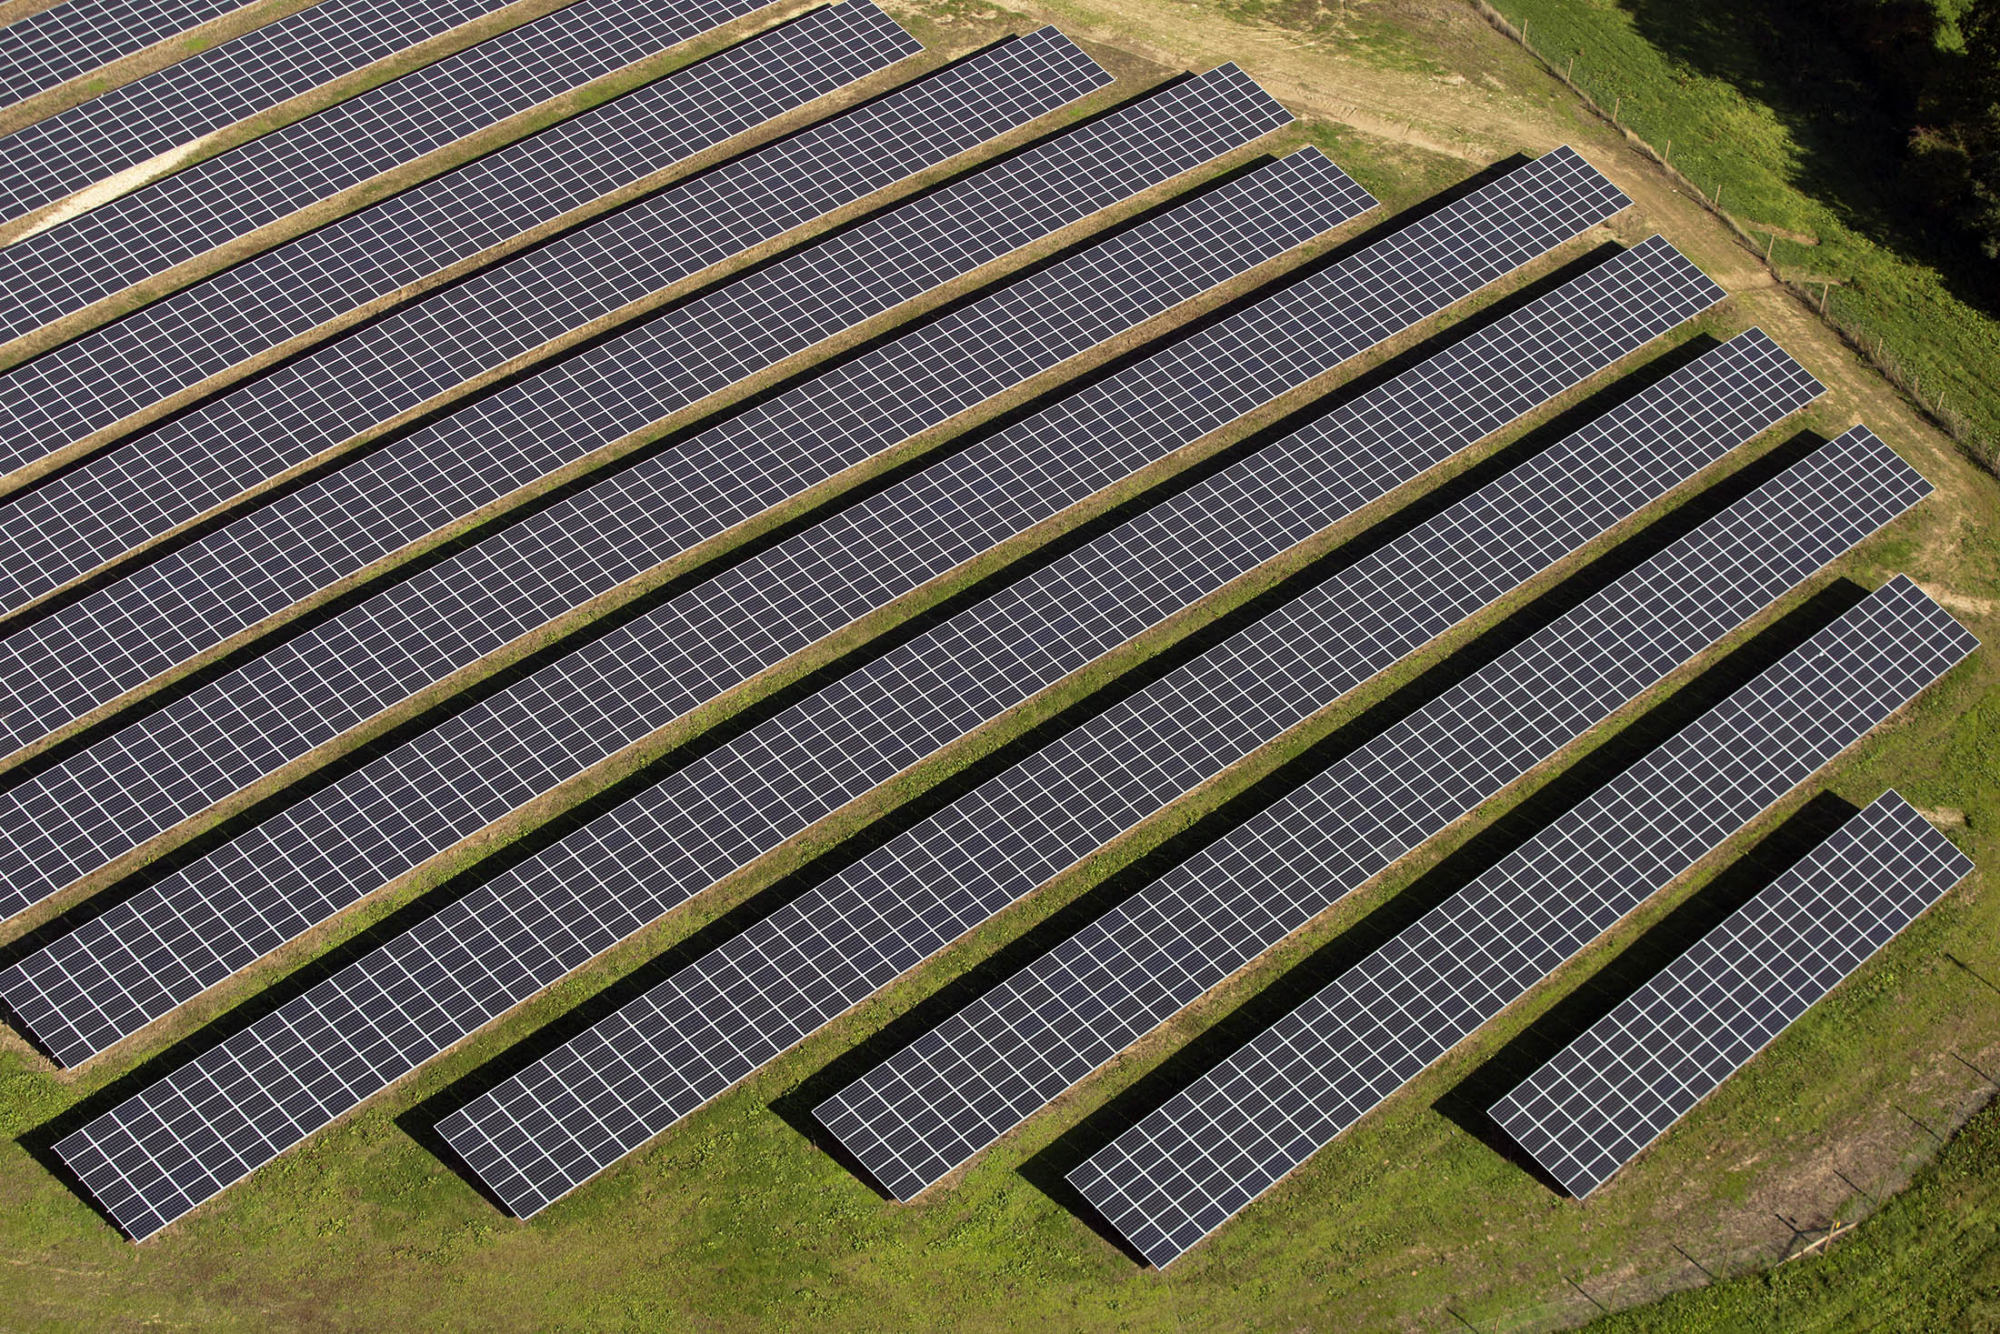 Solar panels sit in an array at the Southwick Estate Solar Farm, operated by Primrose Solar Ltd., near Fareham, U.K., on Friday, Oct. 2, 2015. The plant, situated in 200 acres (81 hectares) of farmland, consists of 175,000 monocrystalline PV modules and has a capacity of 48 megawatts.
